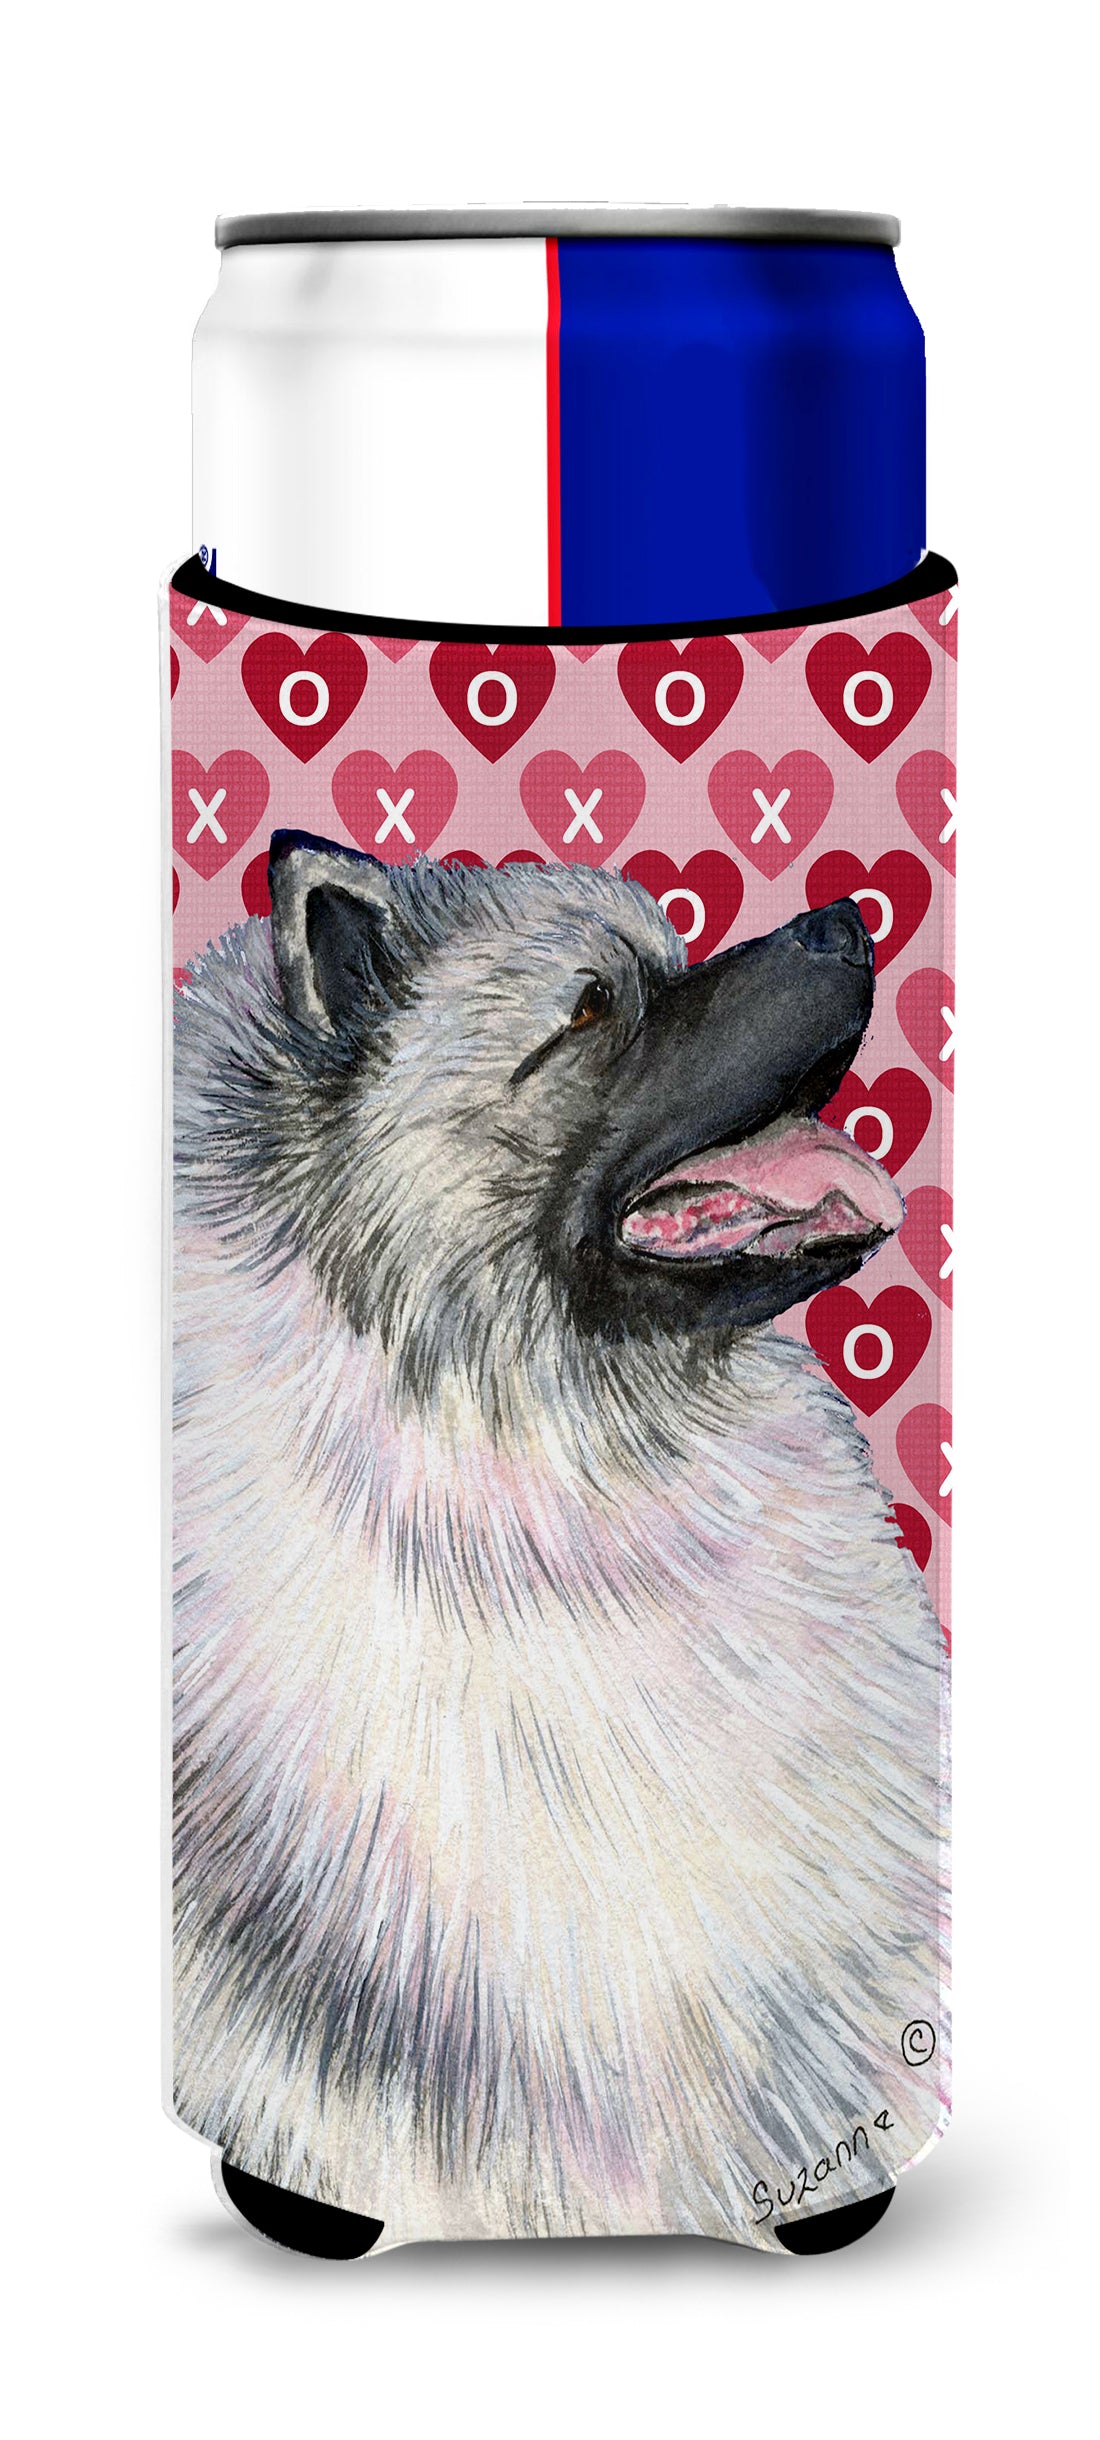 Keeshond Hearts Love and Valentine's Day Portrait Ultra Beverage Insulators for slim cans SS4488MUK.